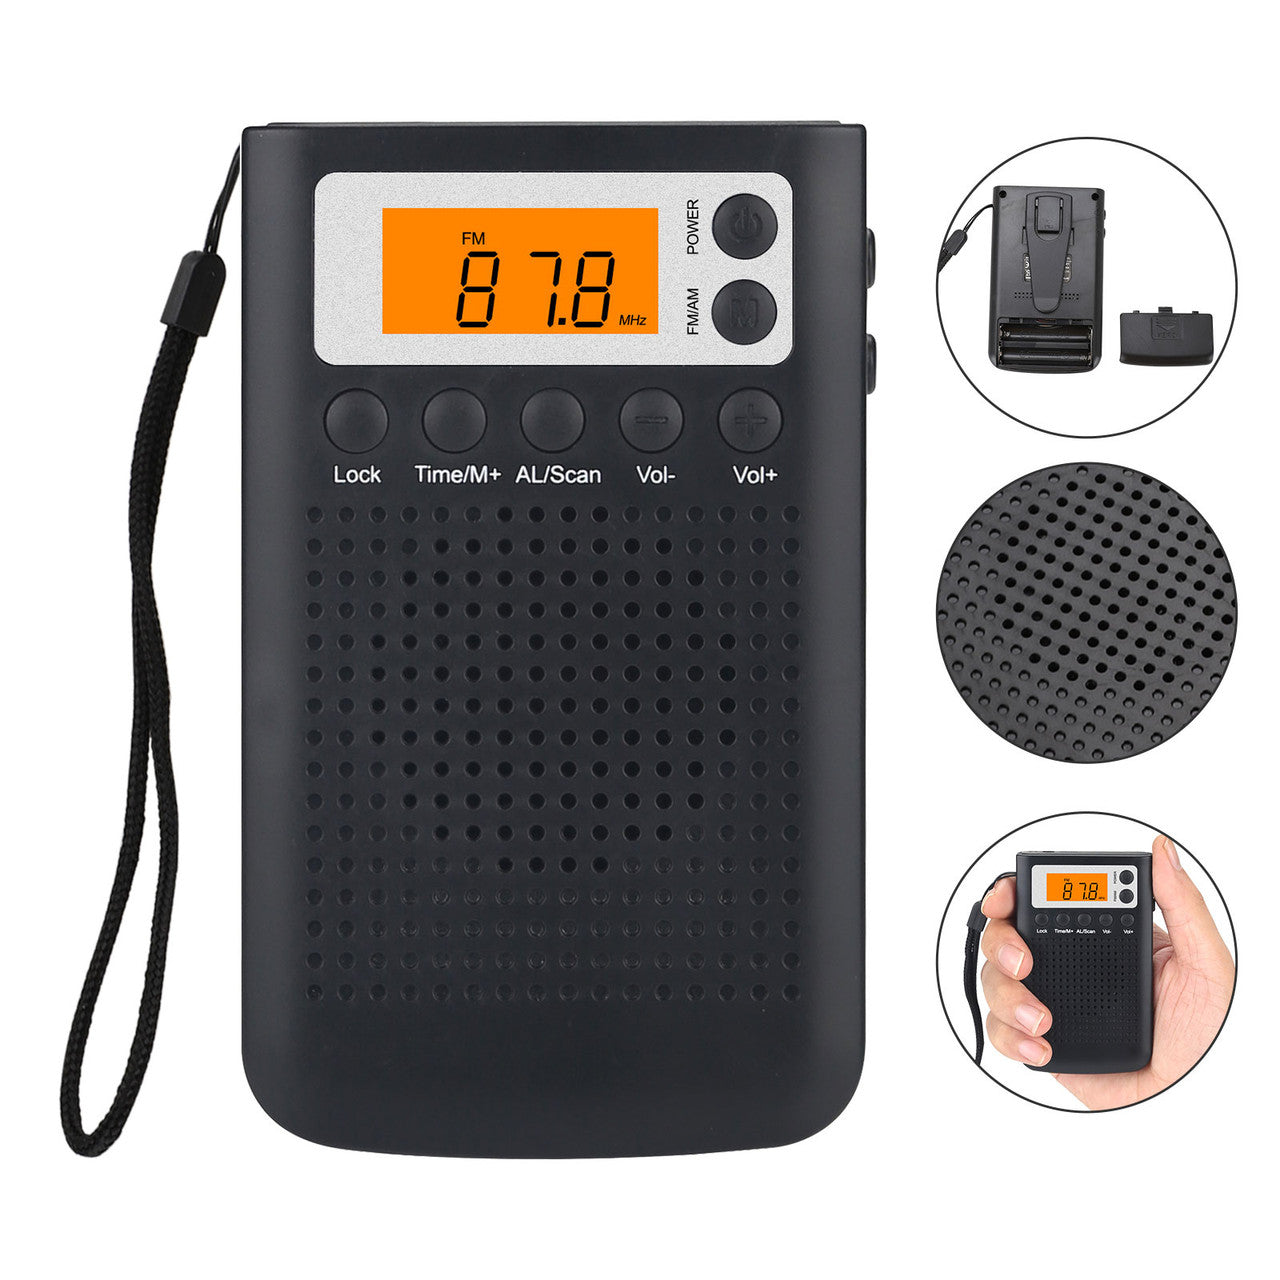 Portable Digital Radio, AM/F-M Battery Operated Pocket Radio - Best Reception and Longest Lasting, AM/F_M Compact Radio Player Operated by 2 AAA Battery, with 3.5mm Headphone Socket (Black)